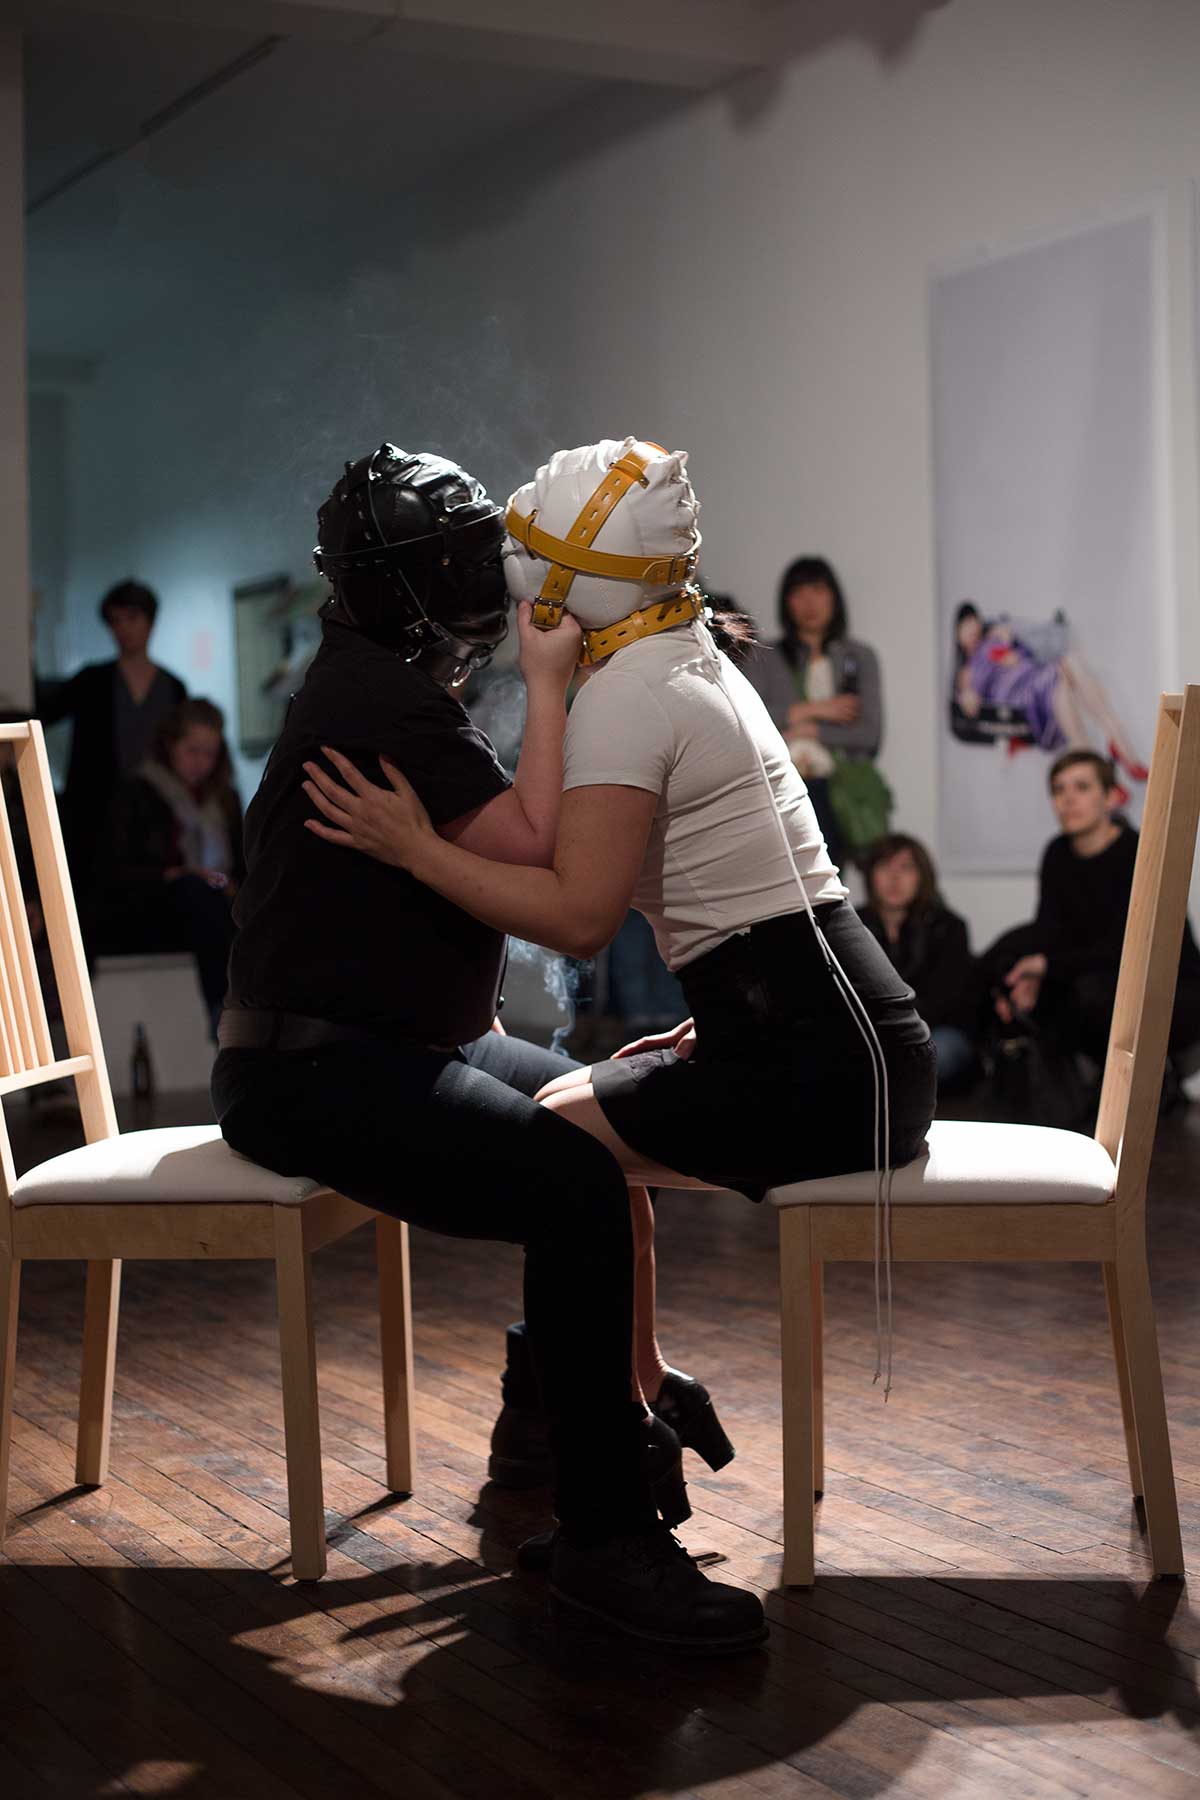 Chun Hua Catherine Dong performs at Articule Montreal: two girls kiss each other while wearing masks